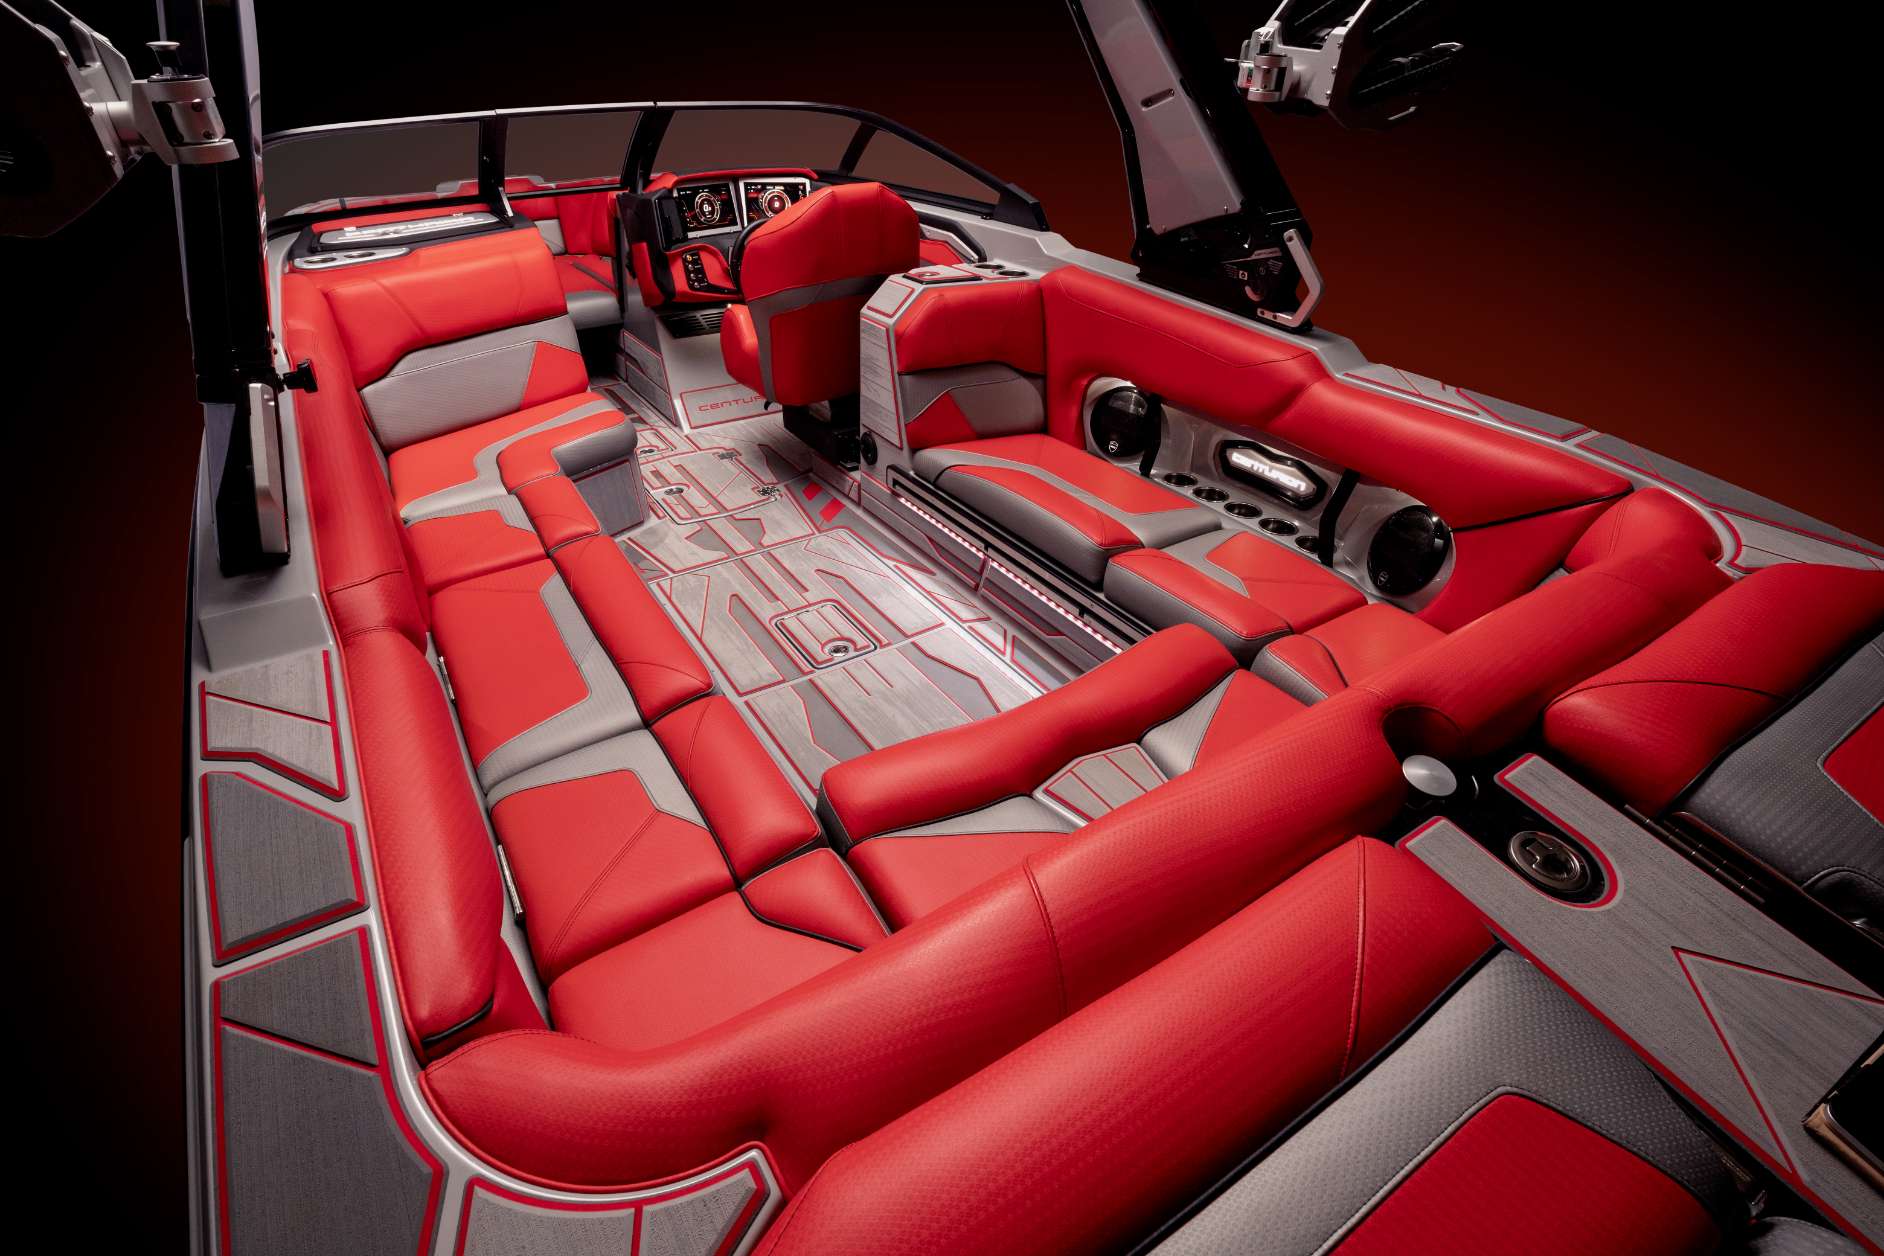 The interior of a red wakesurf boat.